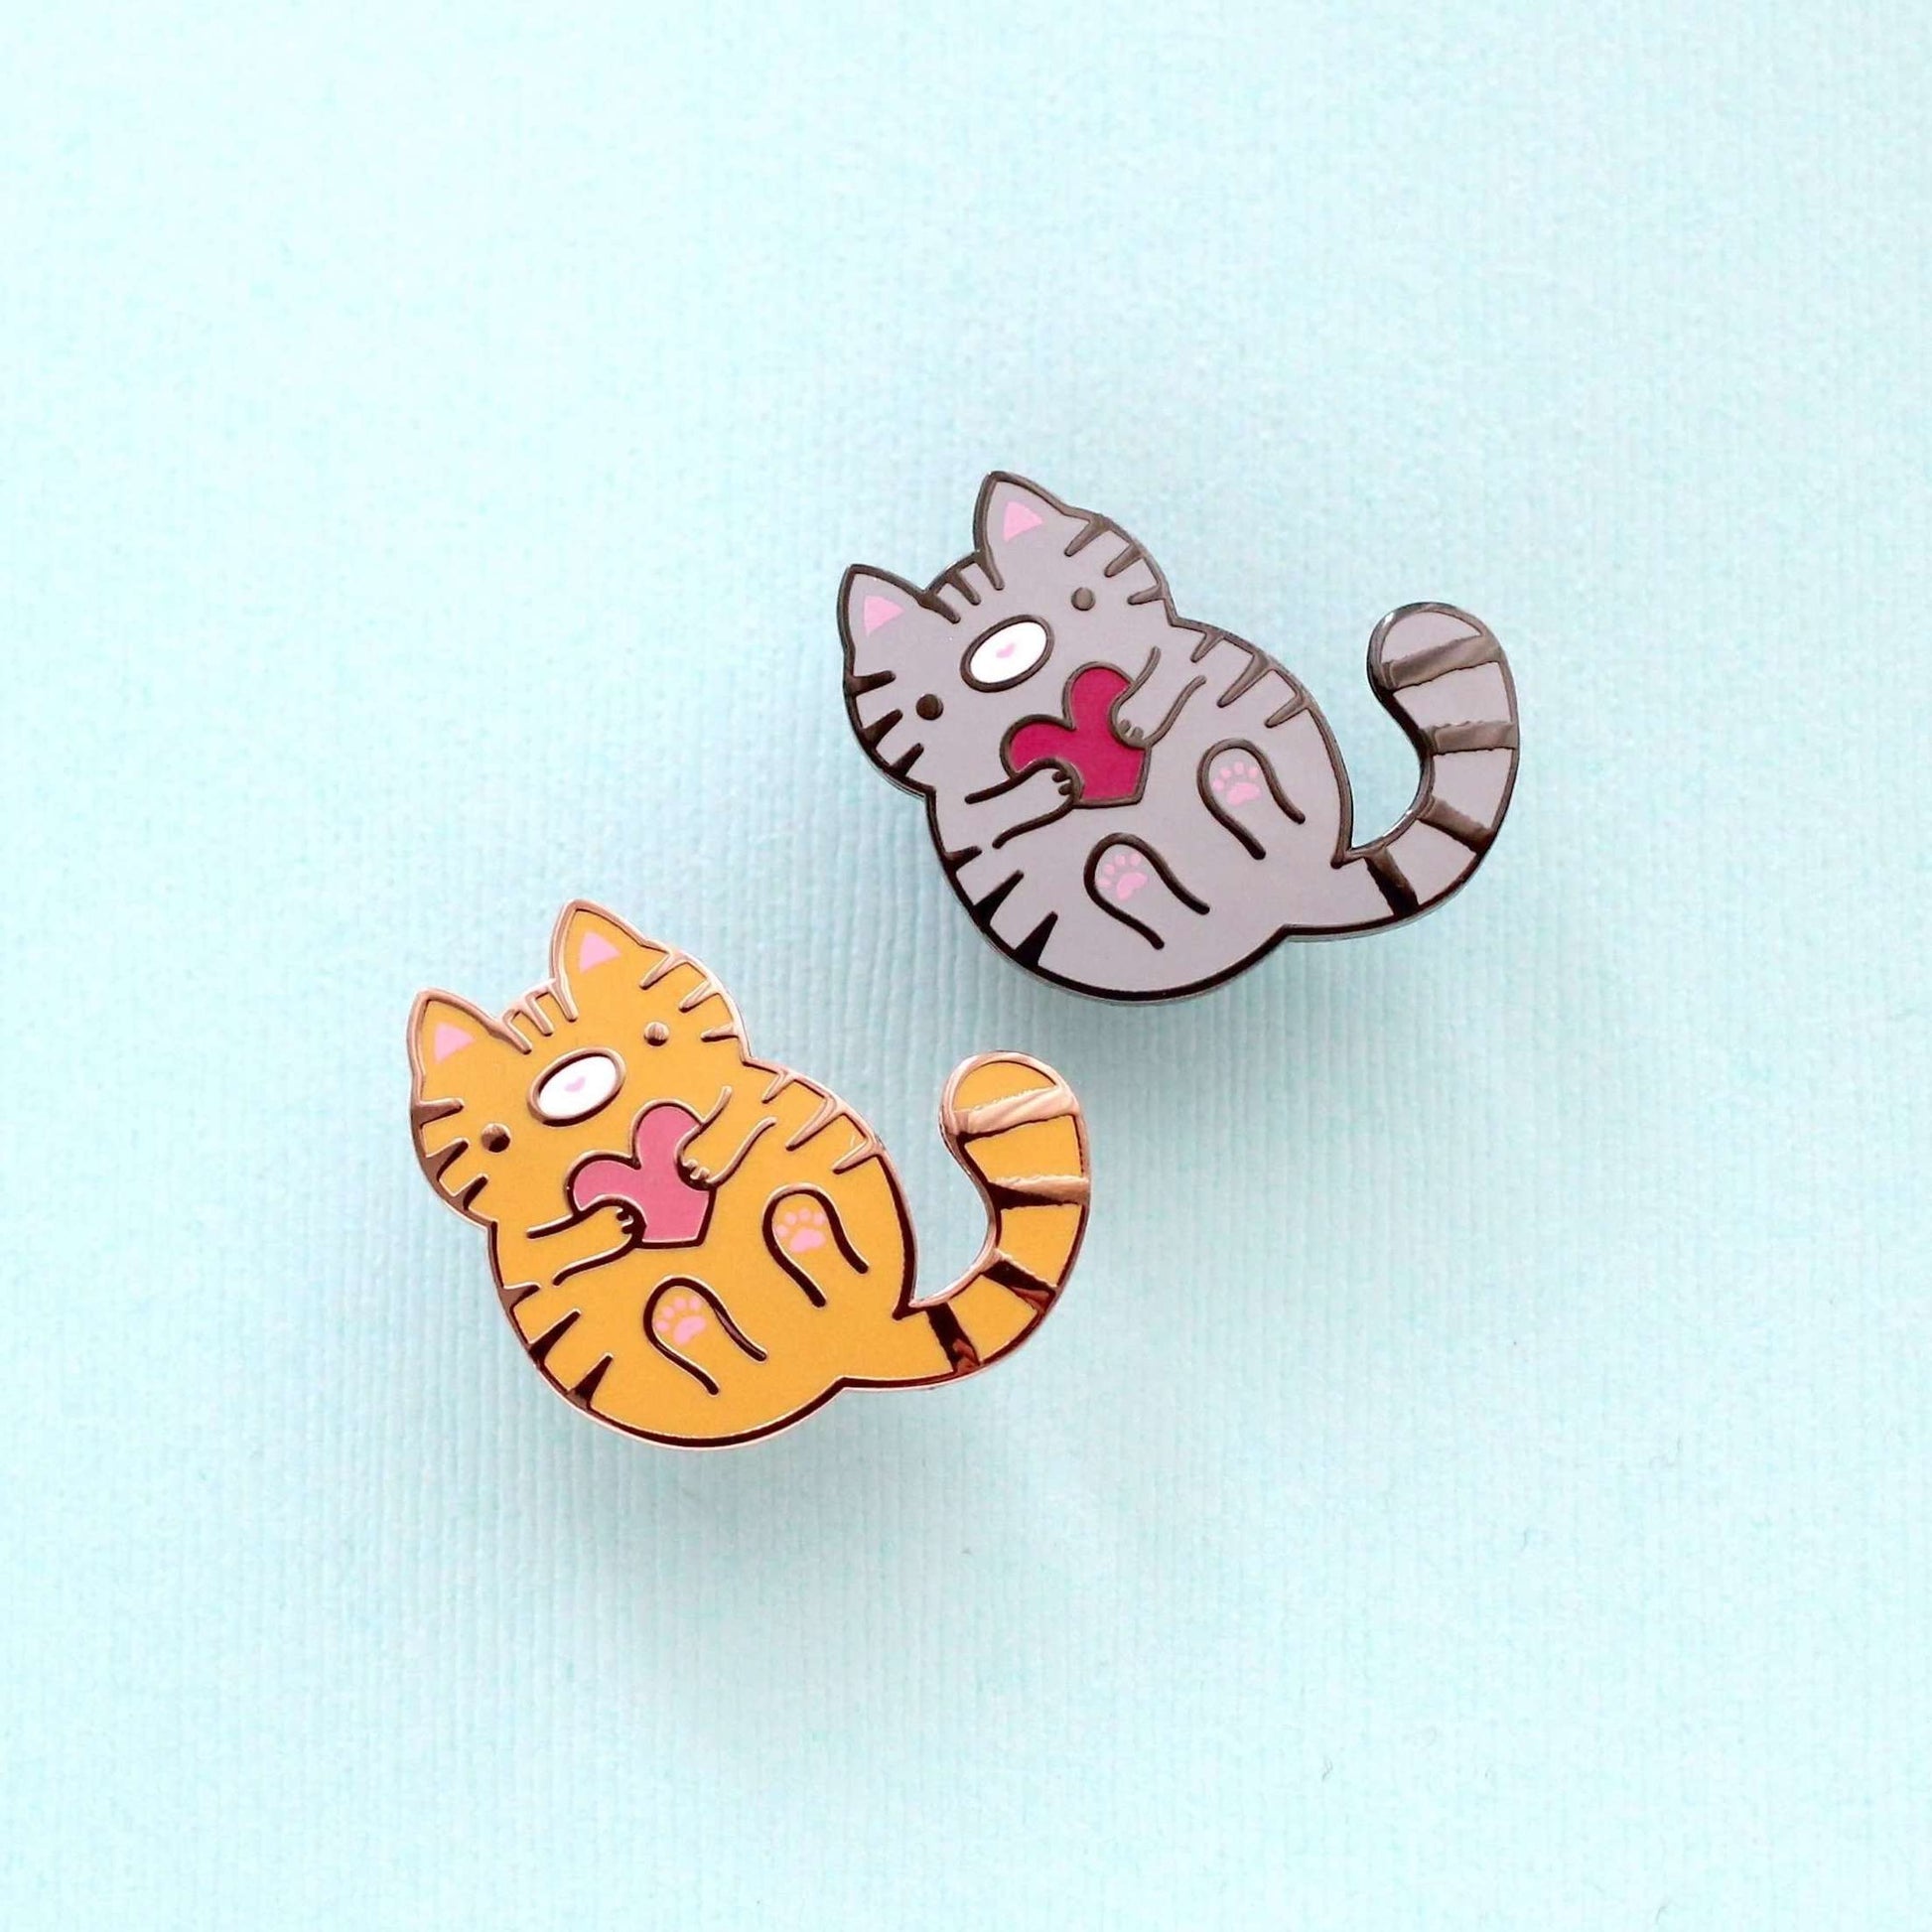 Orange Tabby and Grey Tabby Cat Enamel Pins - Cat Lapel Pins - Set of 2 by Wild Whimsy Woolies